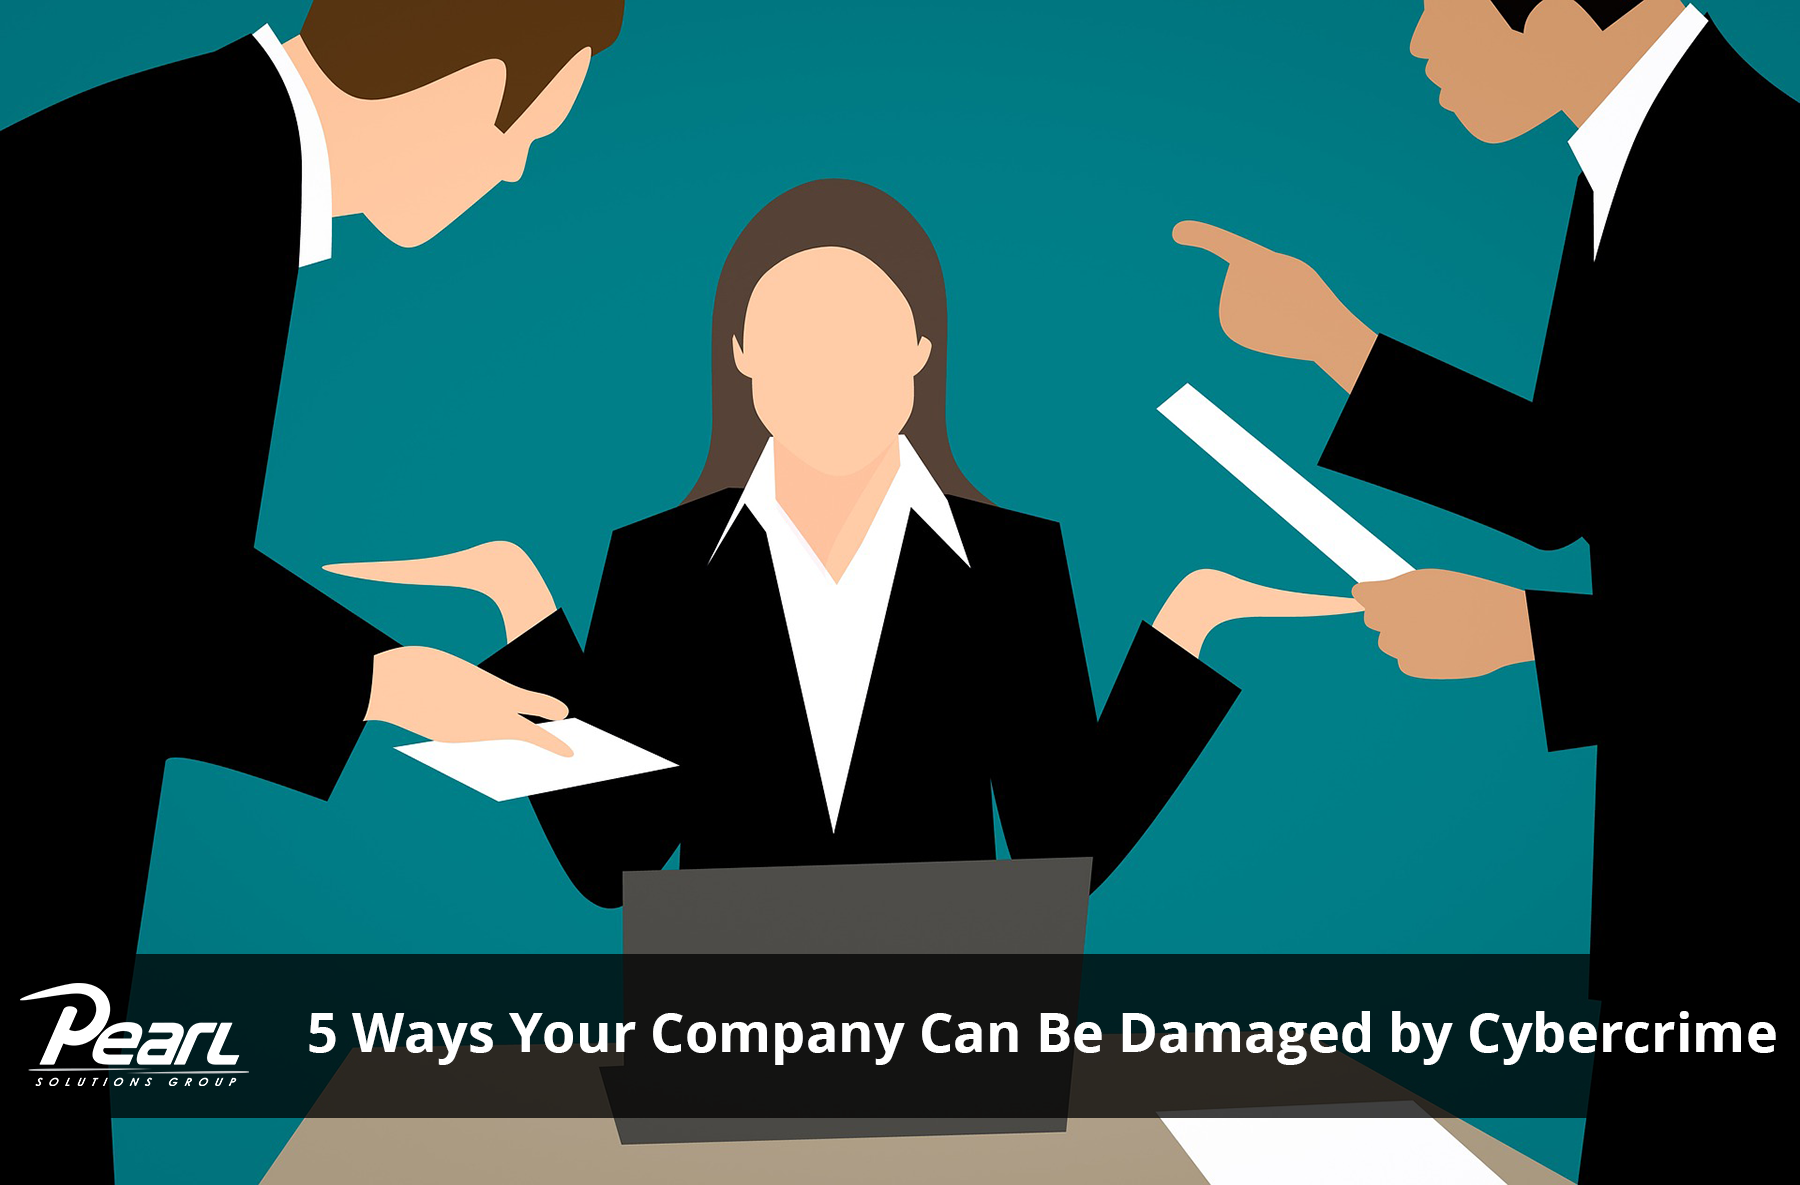 5 Ways Your Company Can Be Damaged by Cybercrime